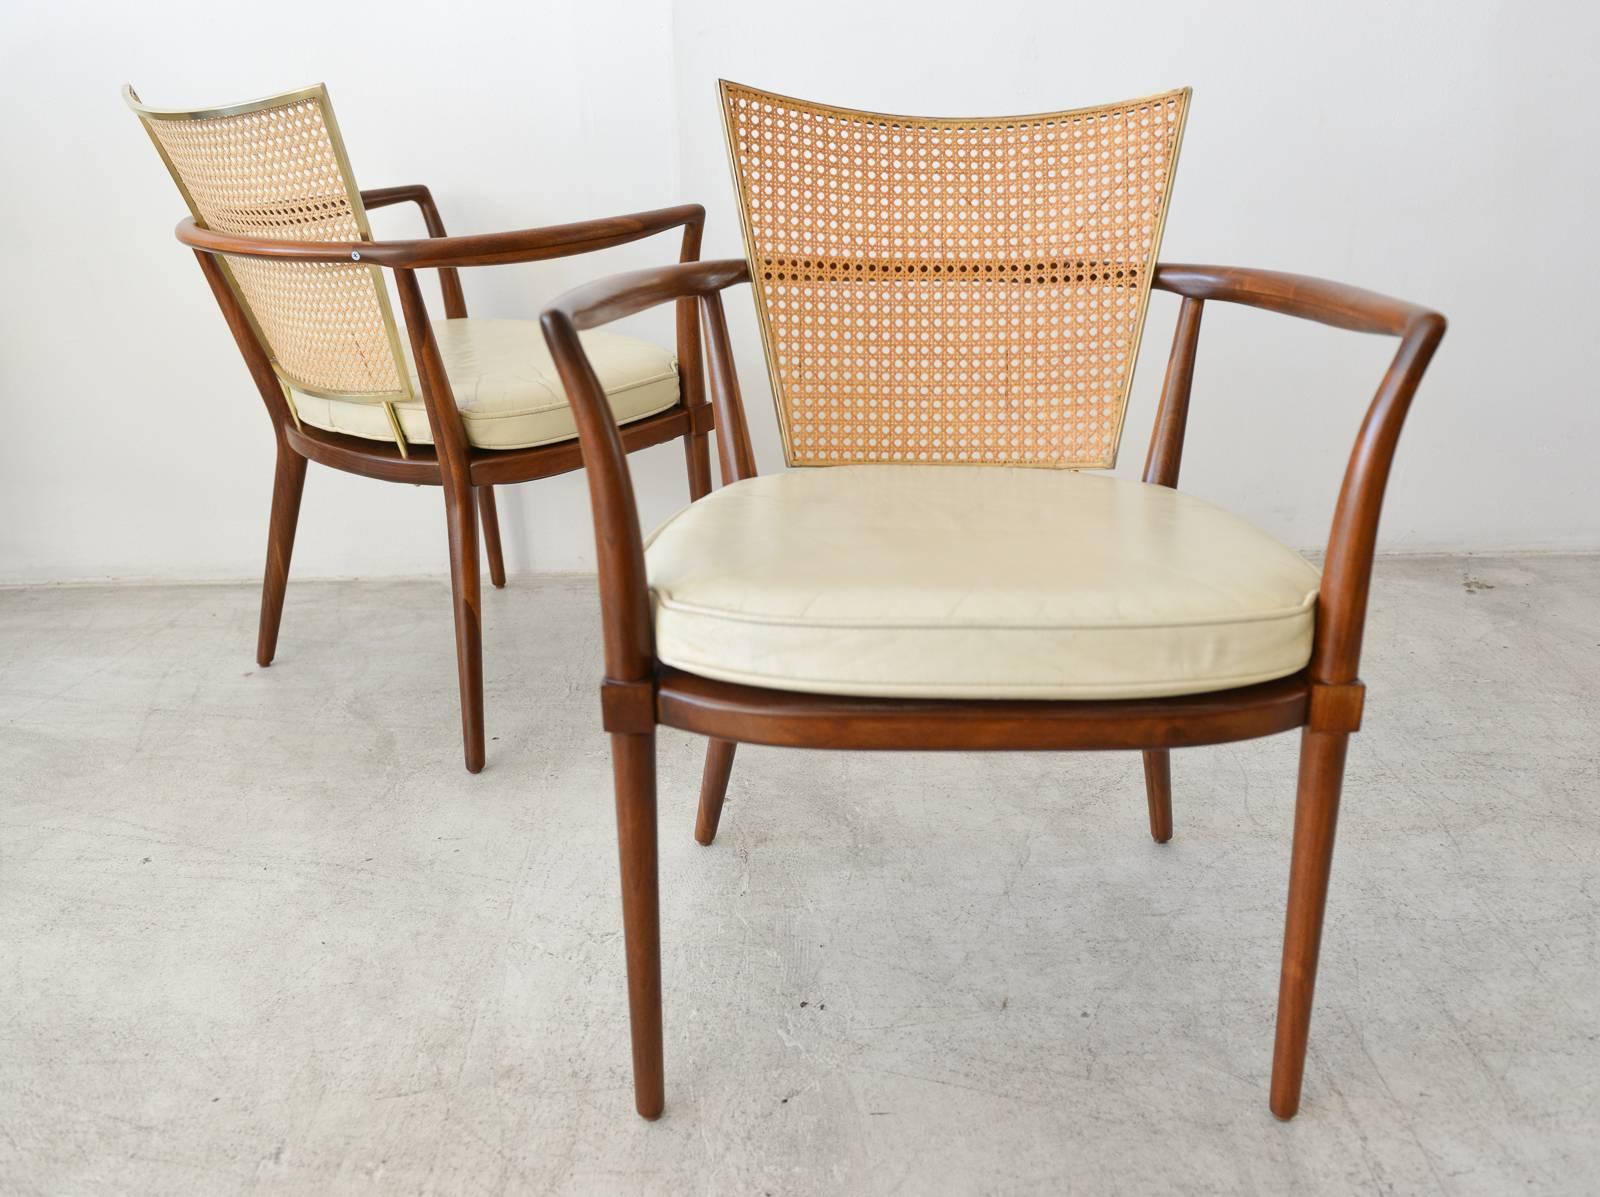 American Pair of Walnut, Cane and Brass Armchairs by Bert England, ca. 1955